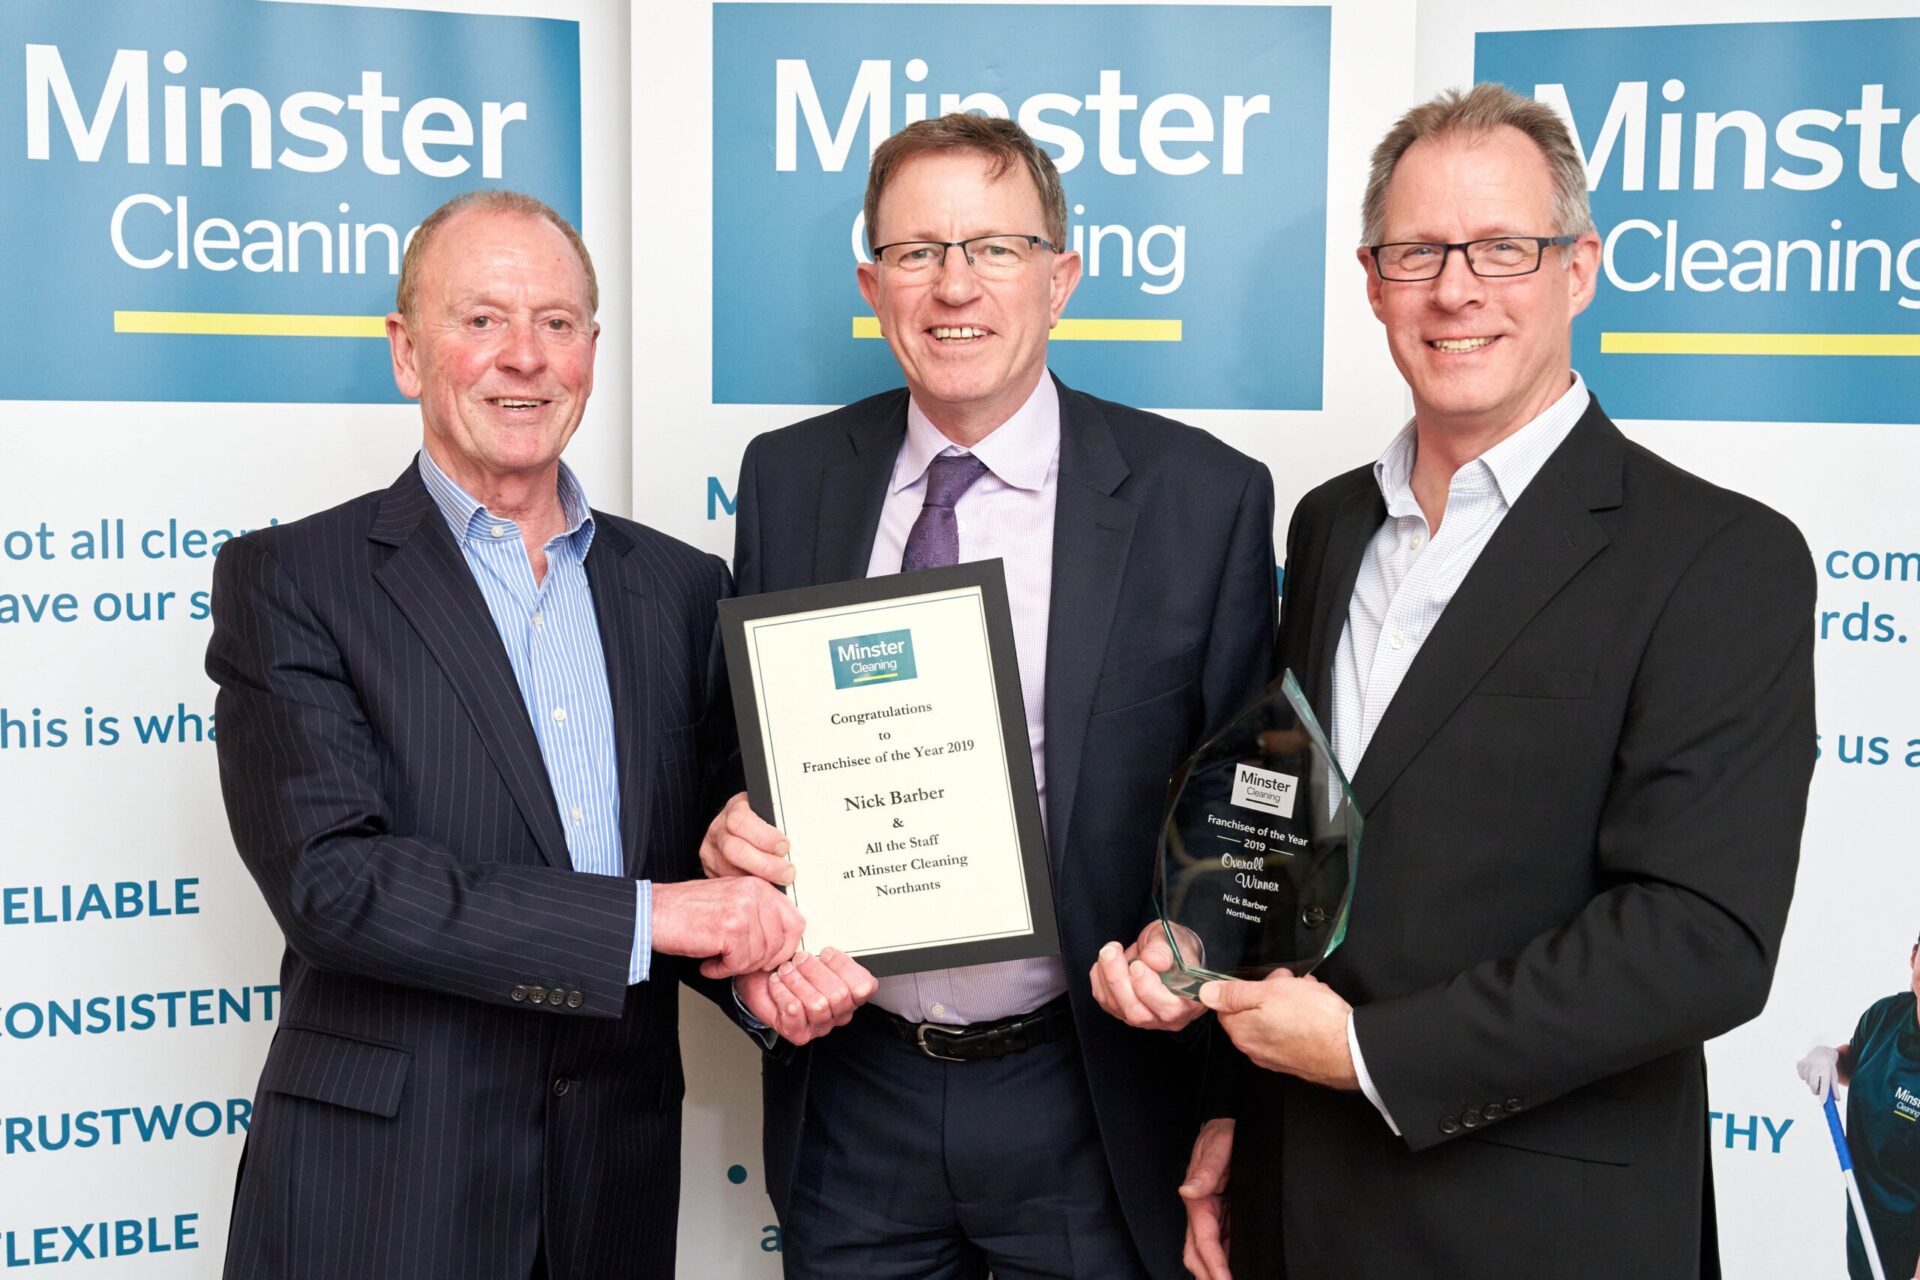 2020 Minster Cleaning Annual Awards